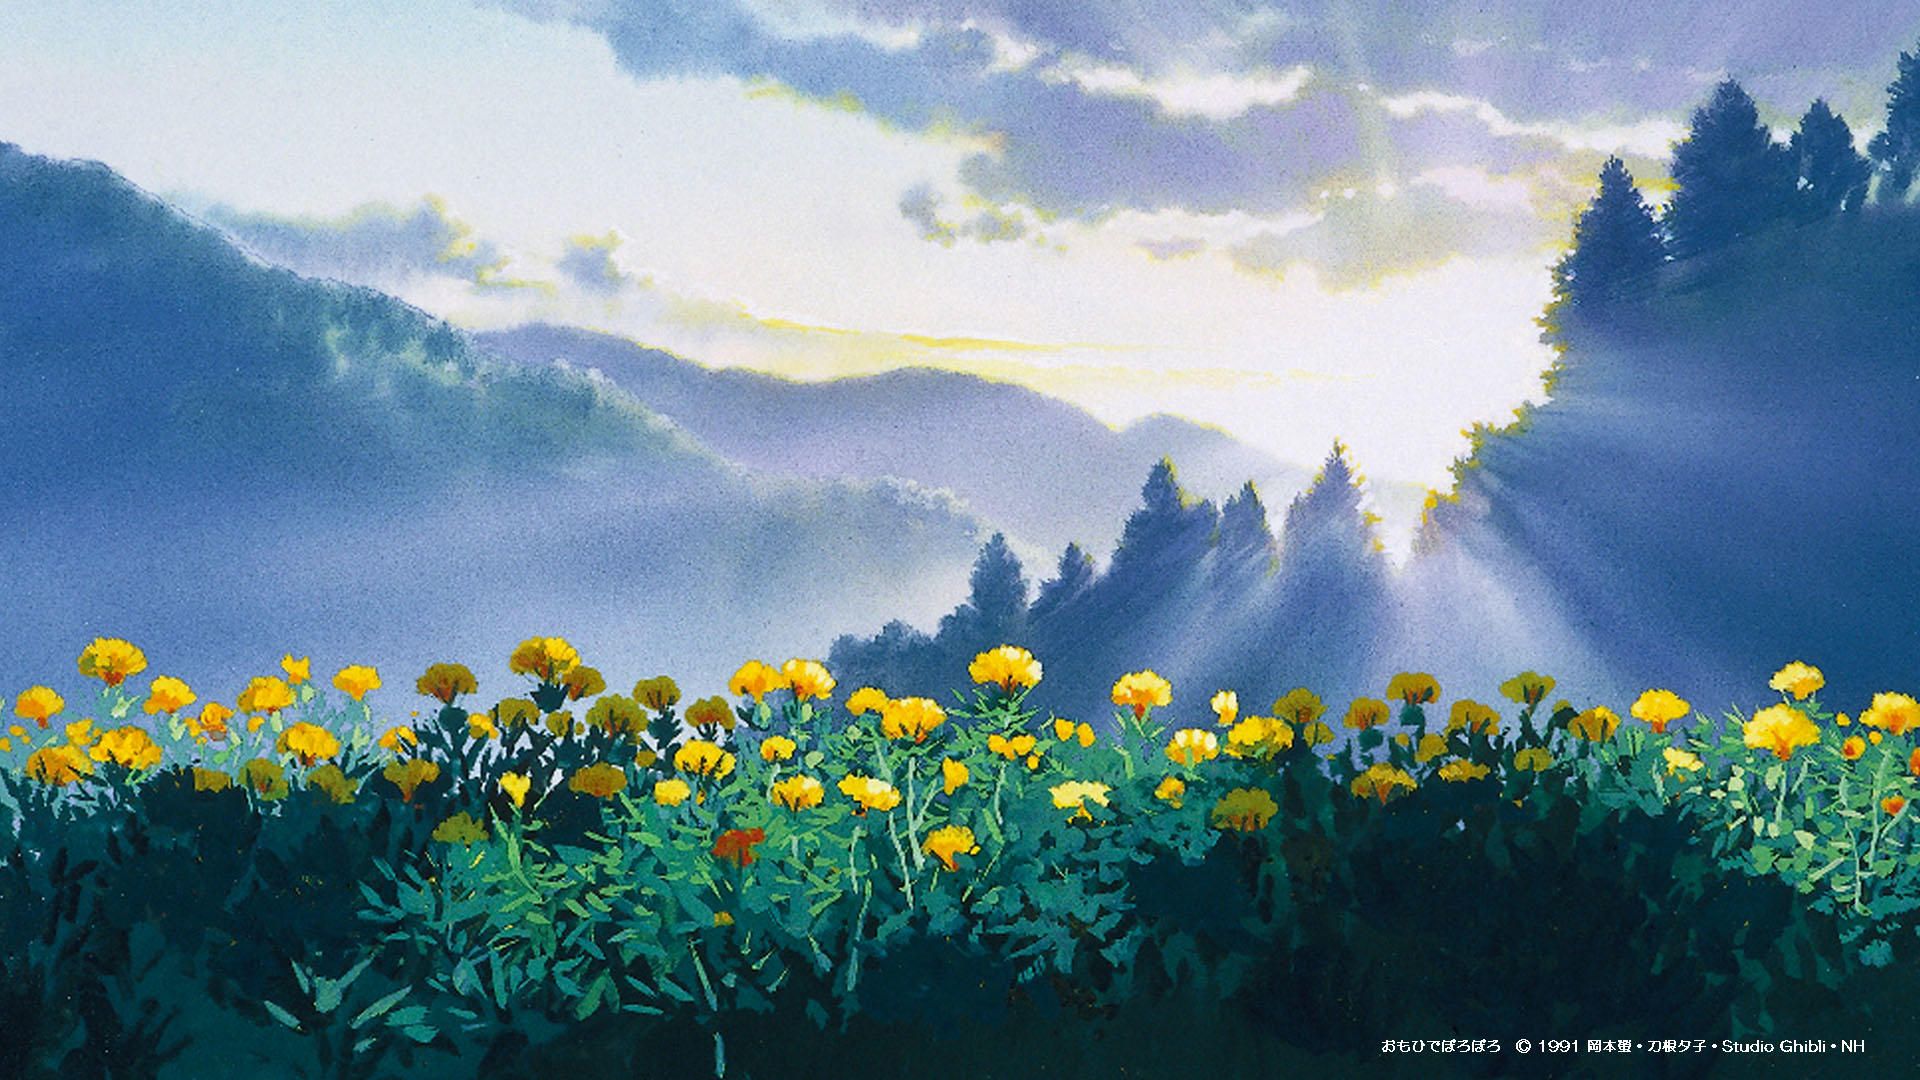 Studio Ghibli releases more new video call background for free